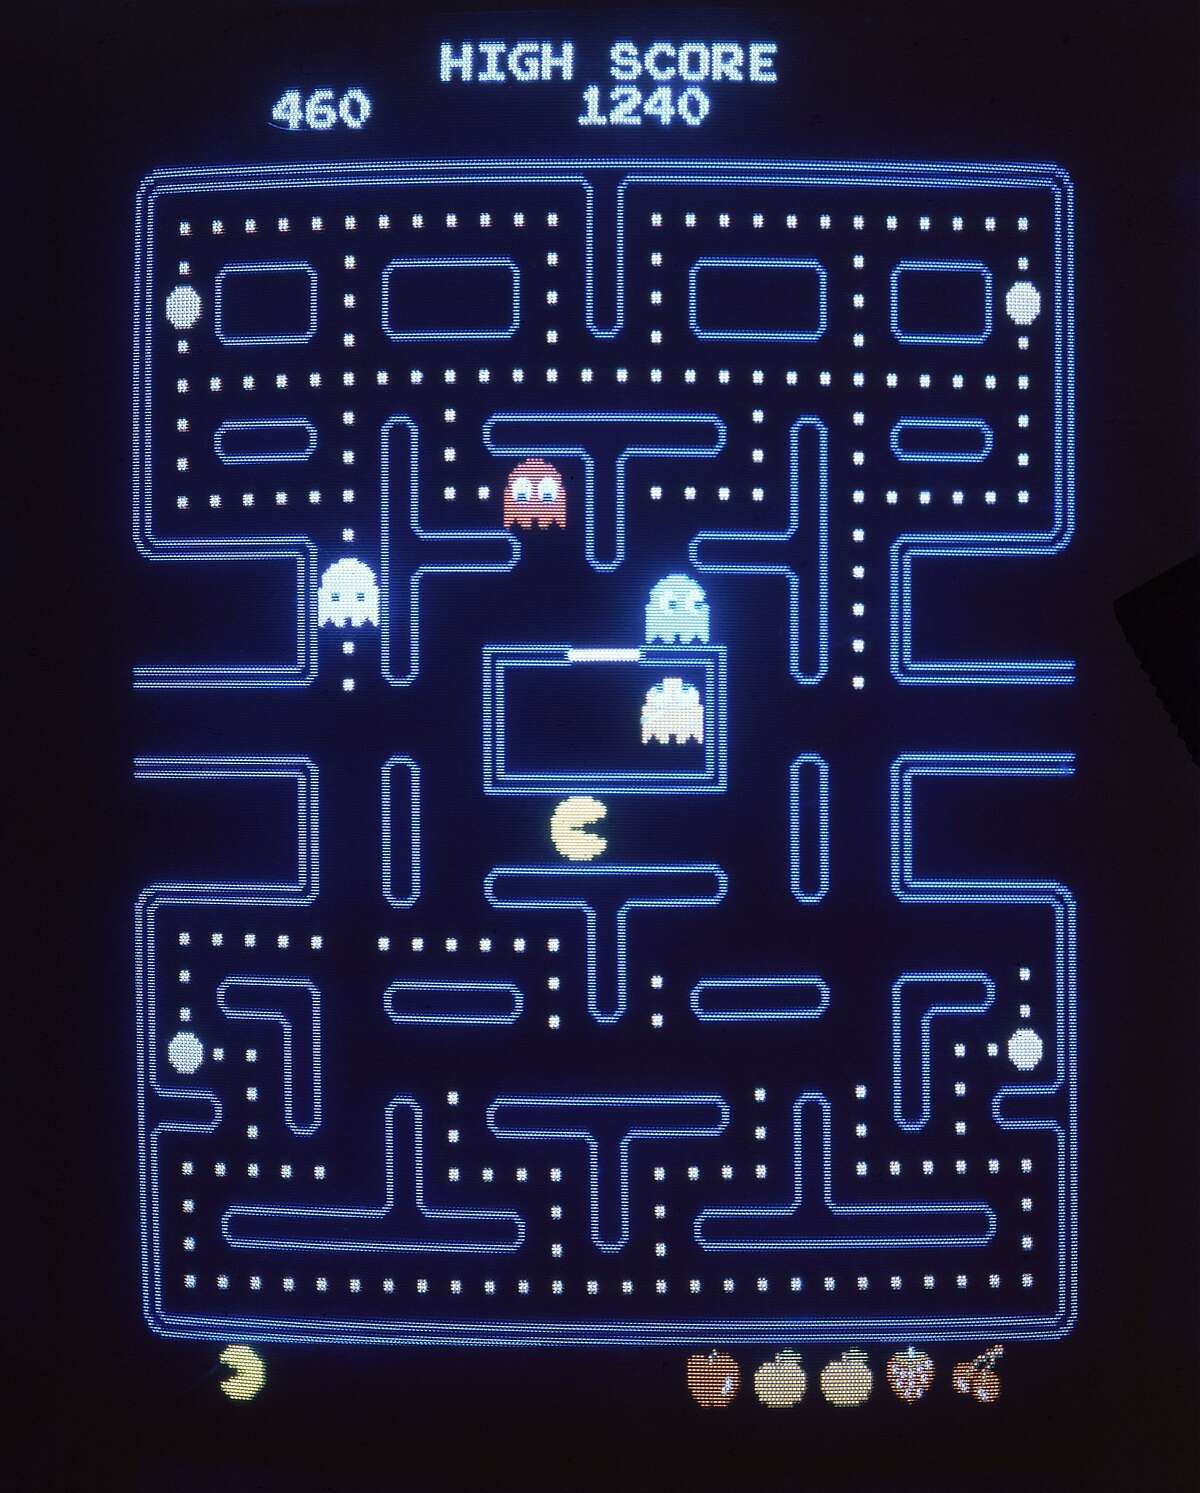 FILE - In this 1983 file photo, this close up view of a monitor shows the electronic video game Pac-Man. Masaya Nakamura, the "Father of Pac-Man" who founded the Japanese video game company behind the hit creature-gobbling game, died on Jan. 22, 2017. He was 91. (AP Photo)